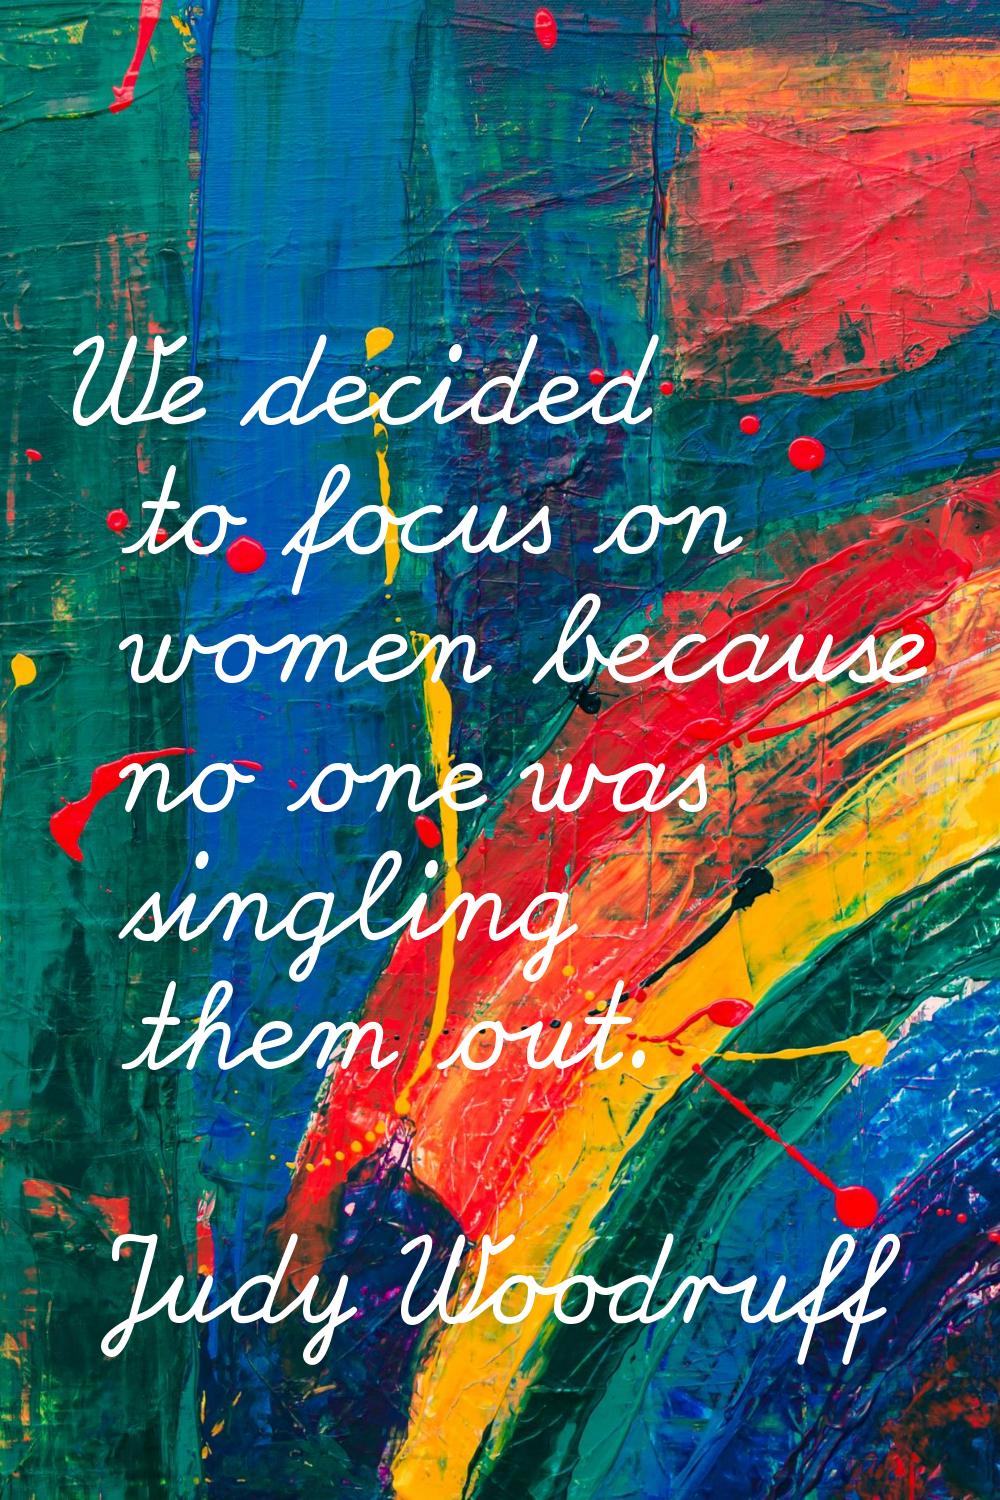 We decided to focus on women because no one was singling them out.